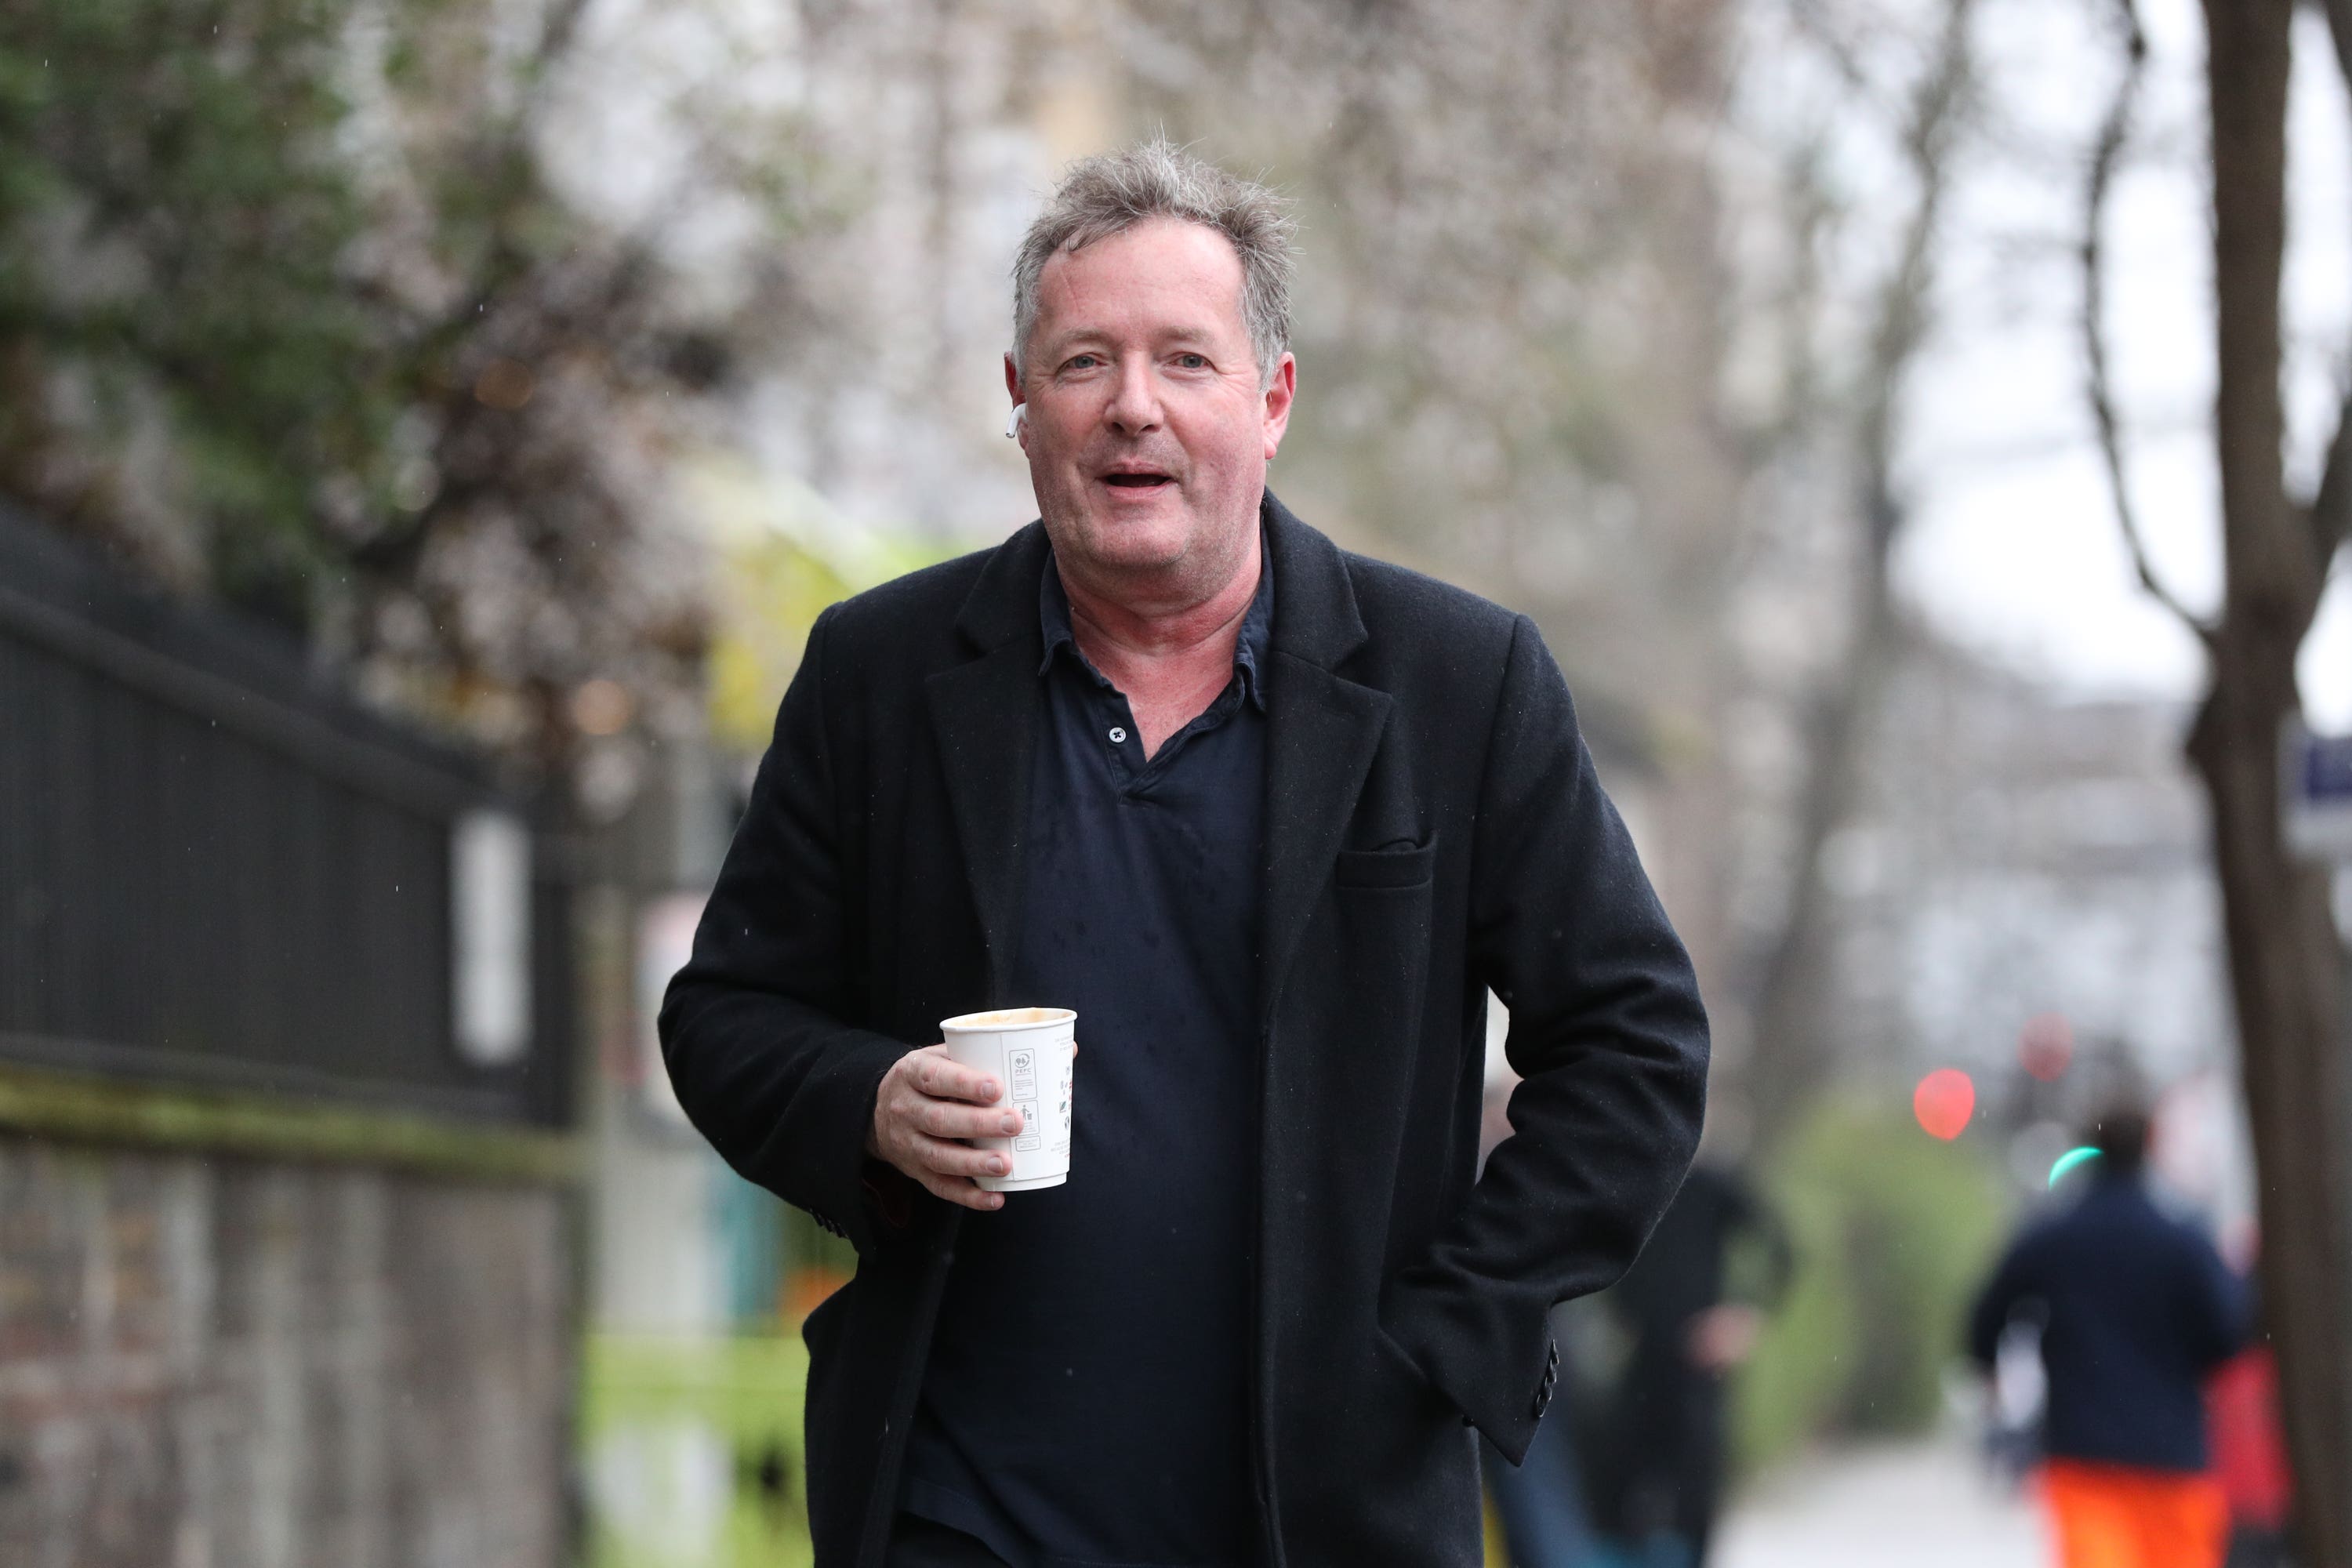 Piers Morgan told ITV reporters on Wednesday that he was ‘not going to take lectures on privacy invasion’ from Prince Harry